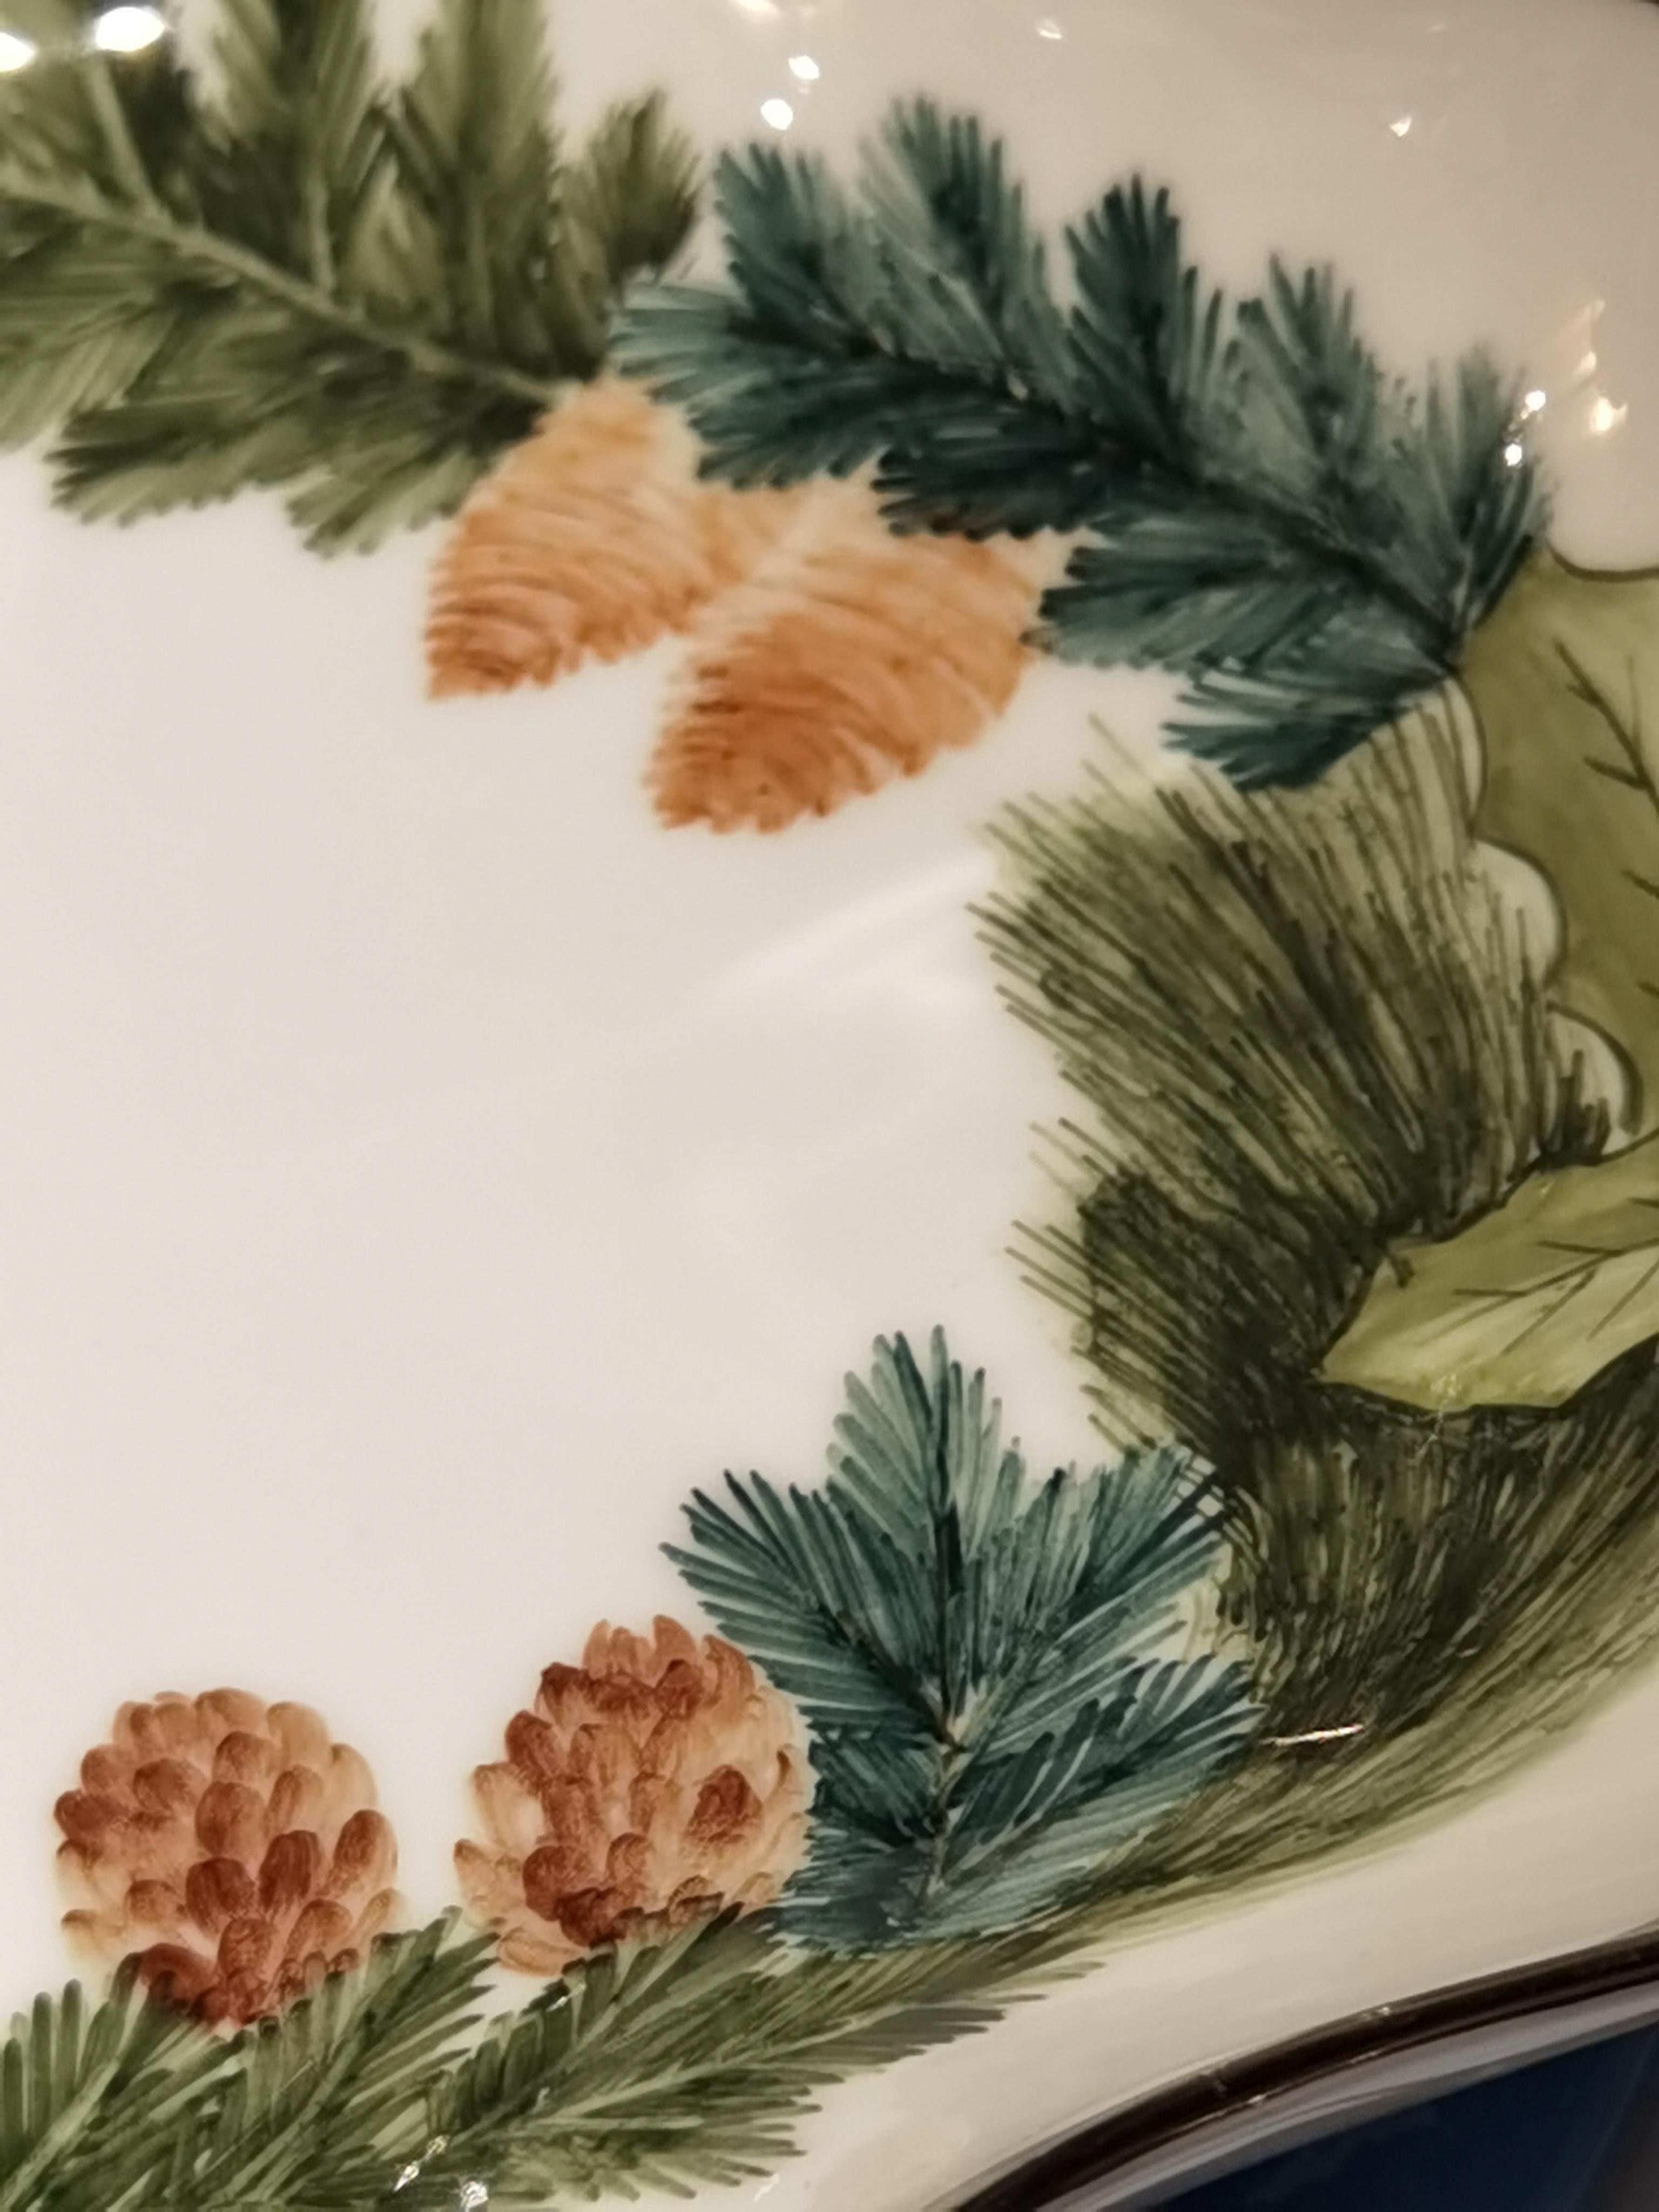 Hands-free painted porcelain dish with platinum rim. Painted in a classic black forest Christmas decor with green fir and pine cone garland. Completely handmade in Bavaria/Germany.